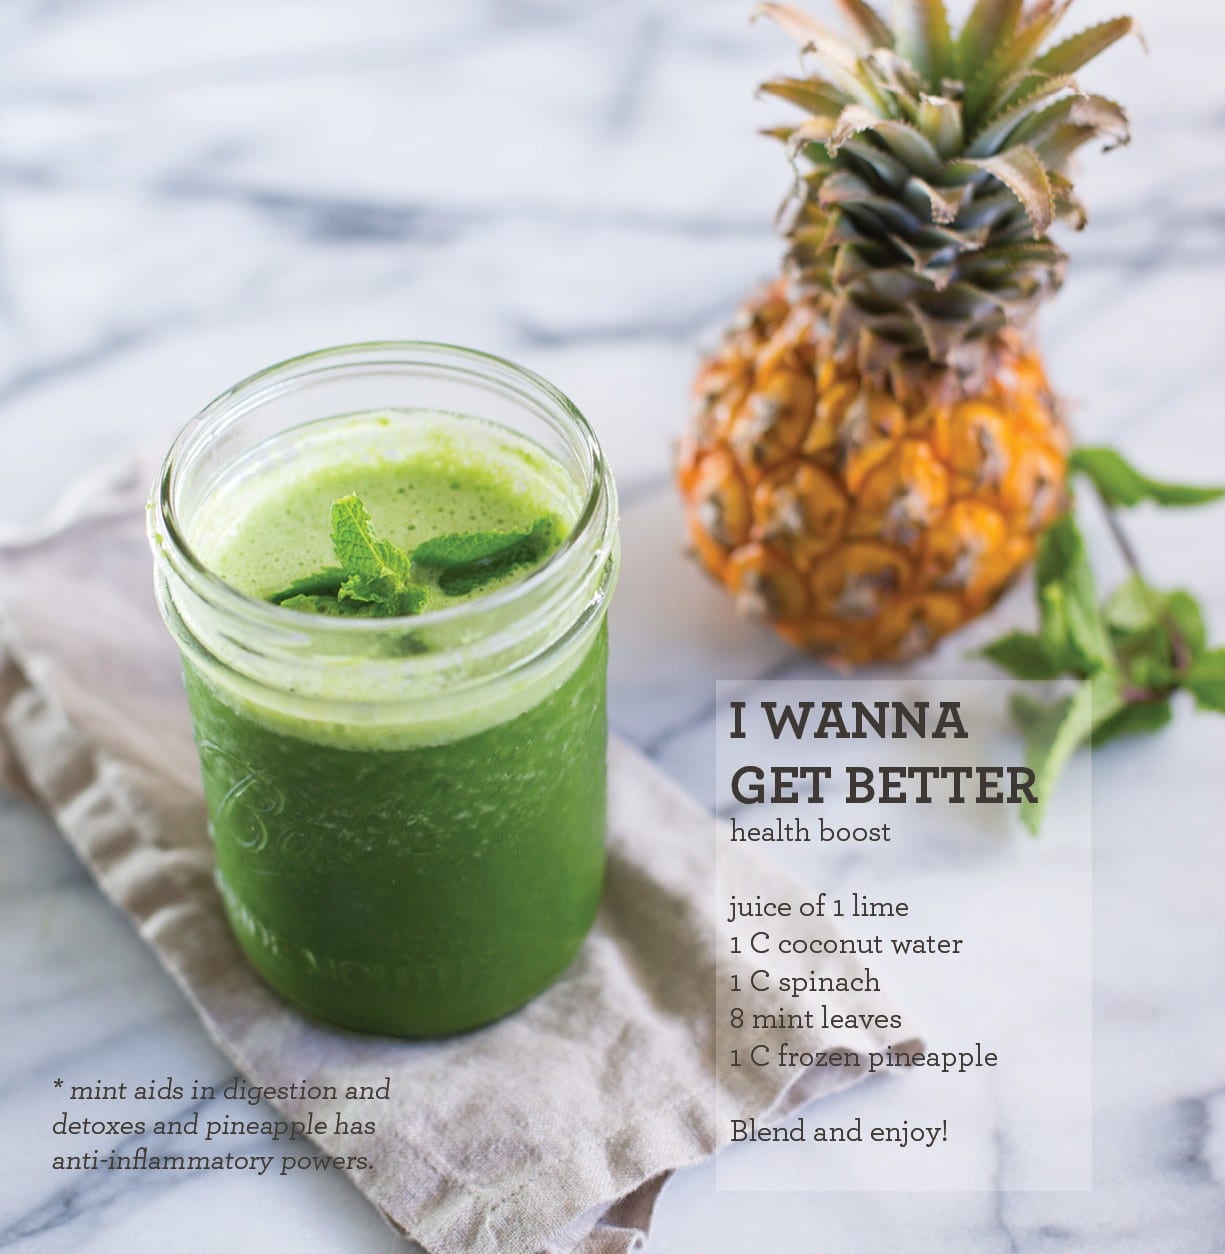 Throat feeling funny? Got the sniffles? Blend up our I wanna get better smoothie up and let its detoxifying, anti-inflammatory and antioxidant ingredients do their magic. 